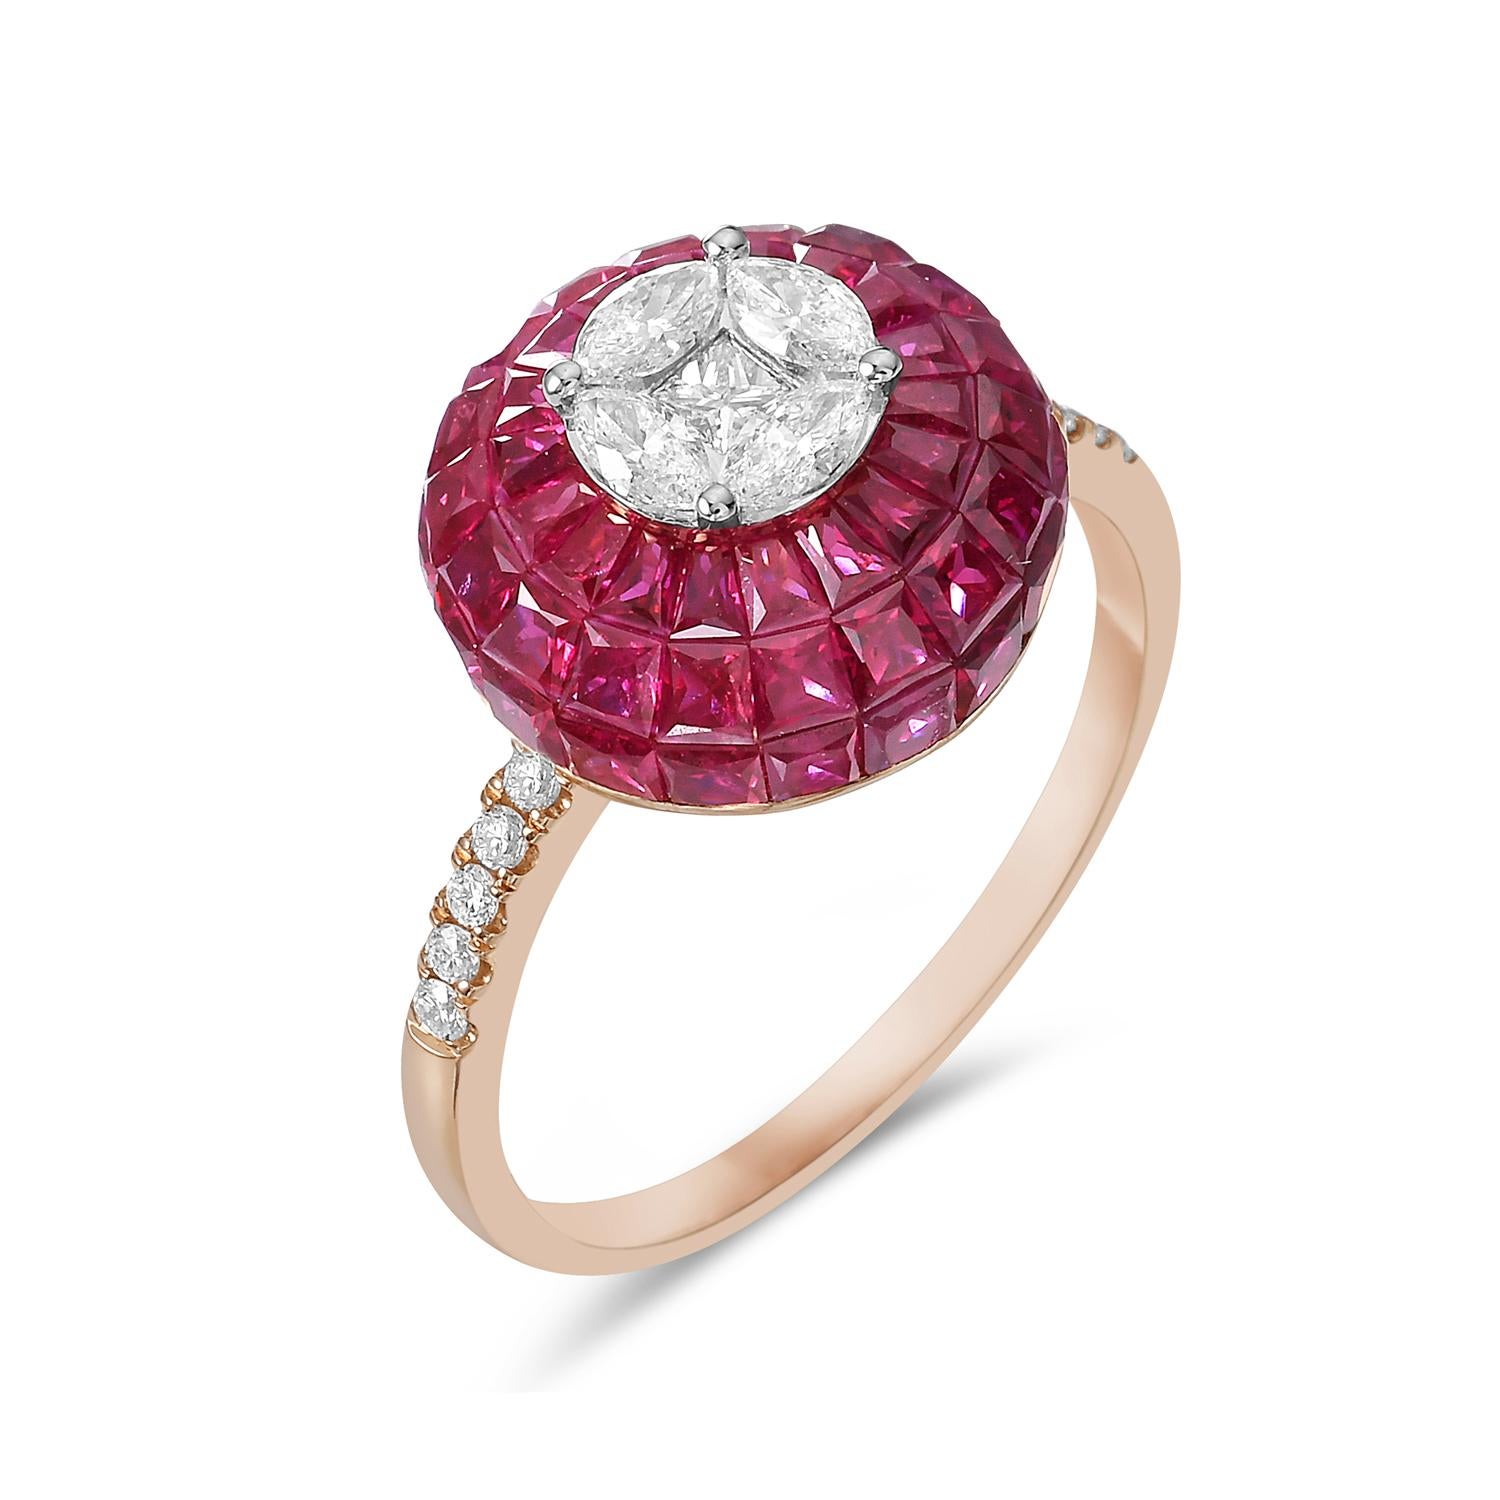 Artisan 4.43 Ct European Cut Ruby Cocktail Ring With Diamonds In 18k Gold For Sale